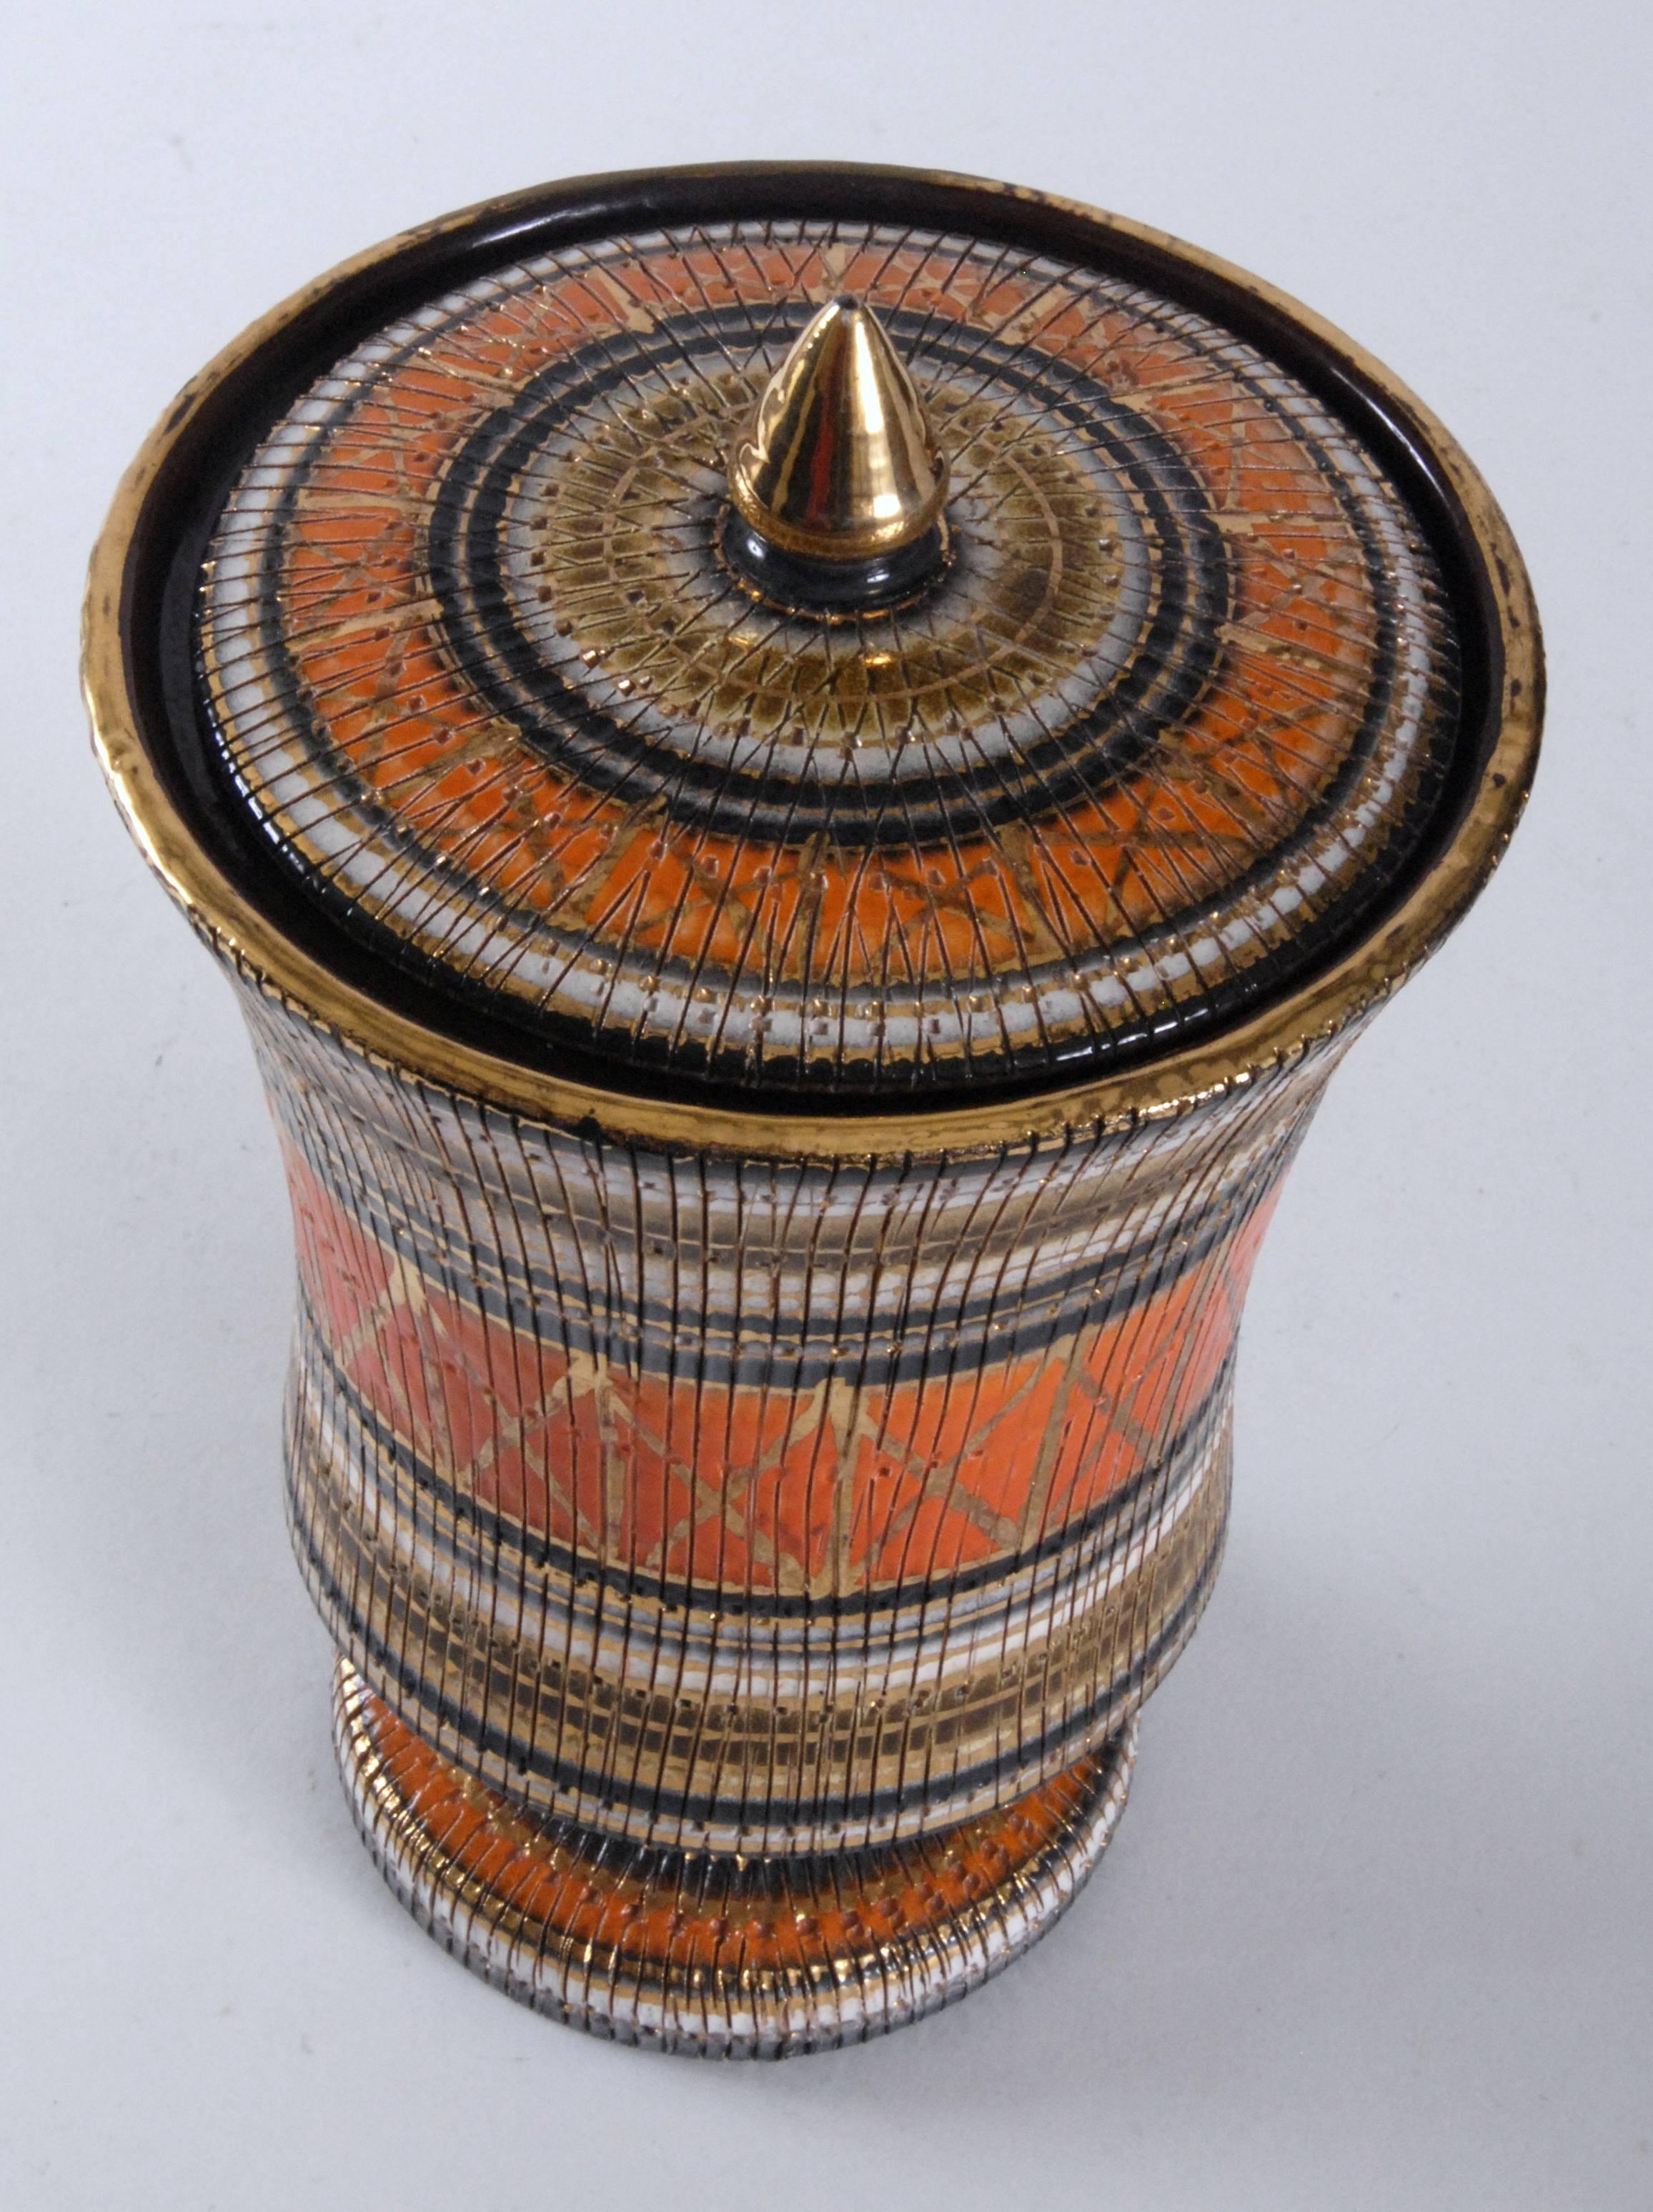 Covered urn in 'Seta' pattern with 'Lobster' version color way. Gilt rims and knop to lid. Signed underneath. Small repair to rim of urn. Interior with a rich brown glaze.